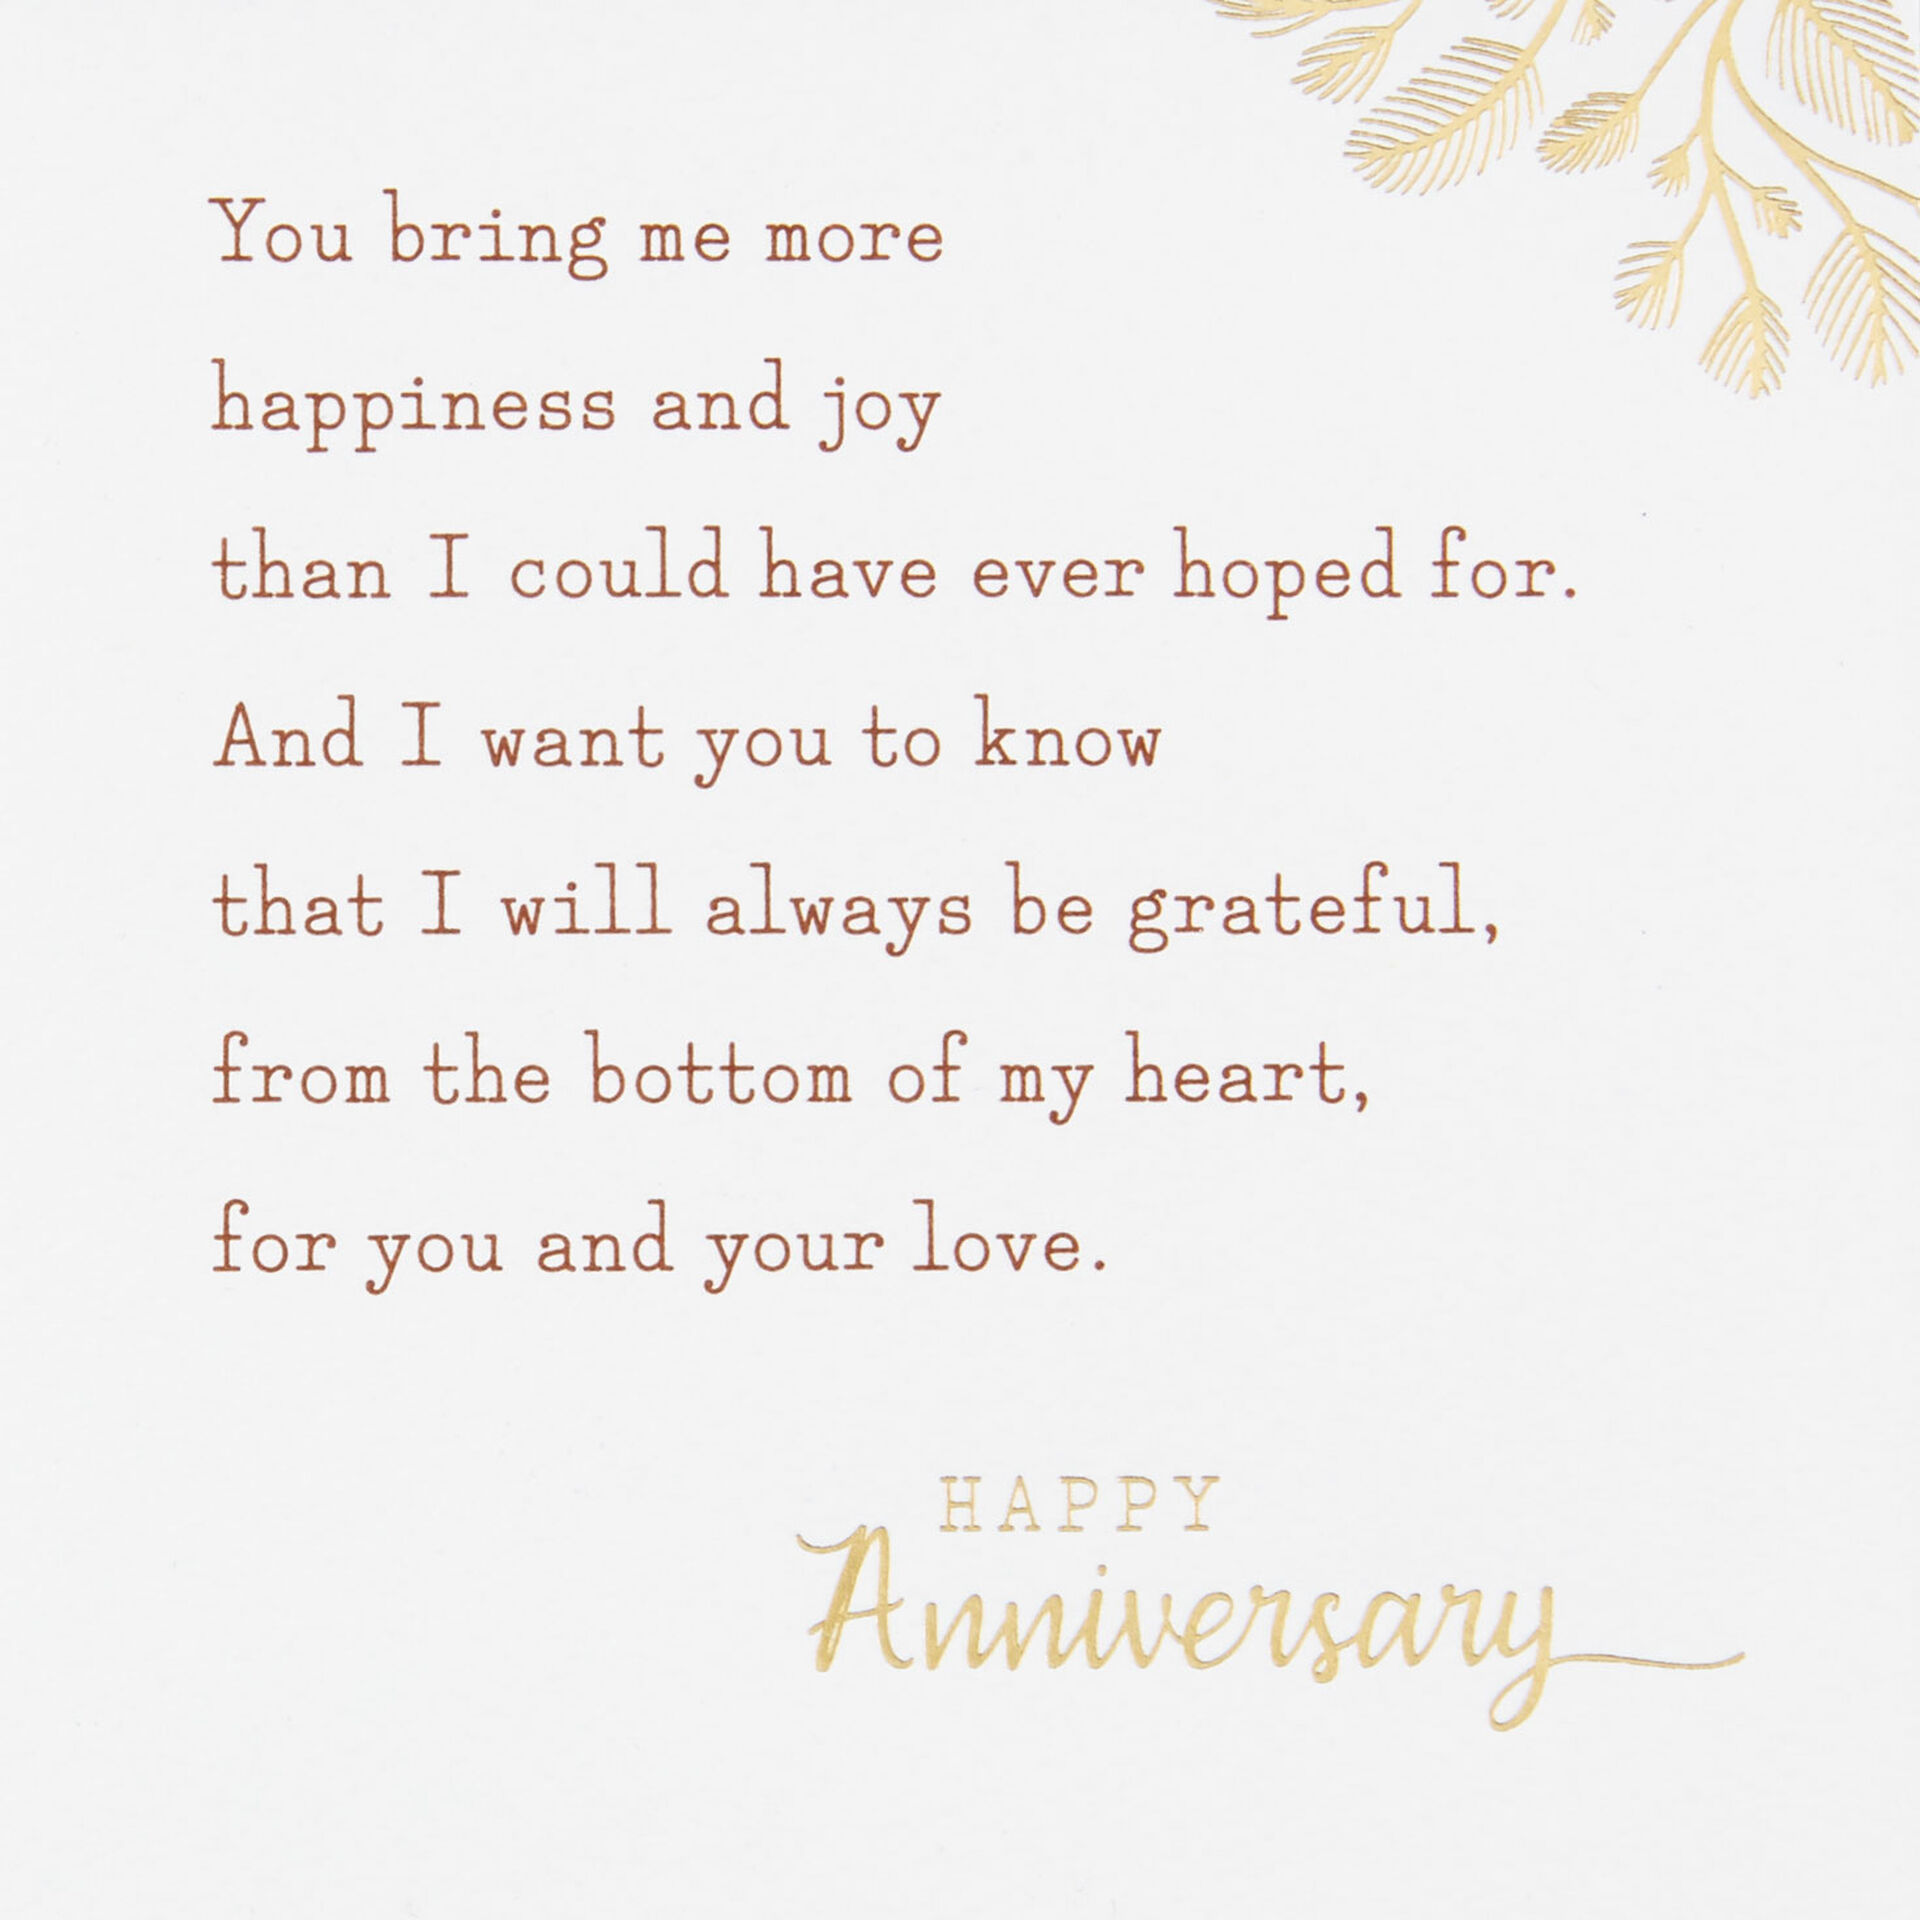 Holding-Hands-Anniversary-Card-for-Man-I-Love_699AVY2902_03